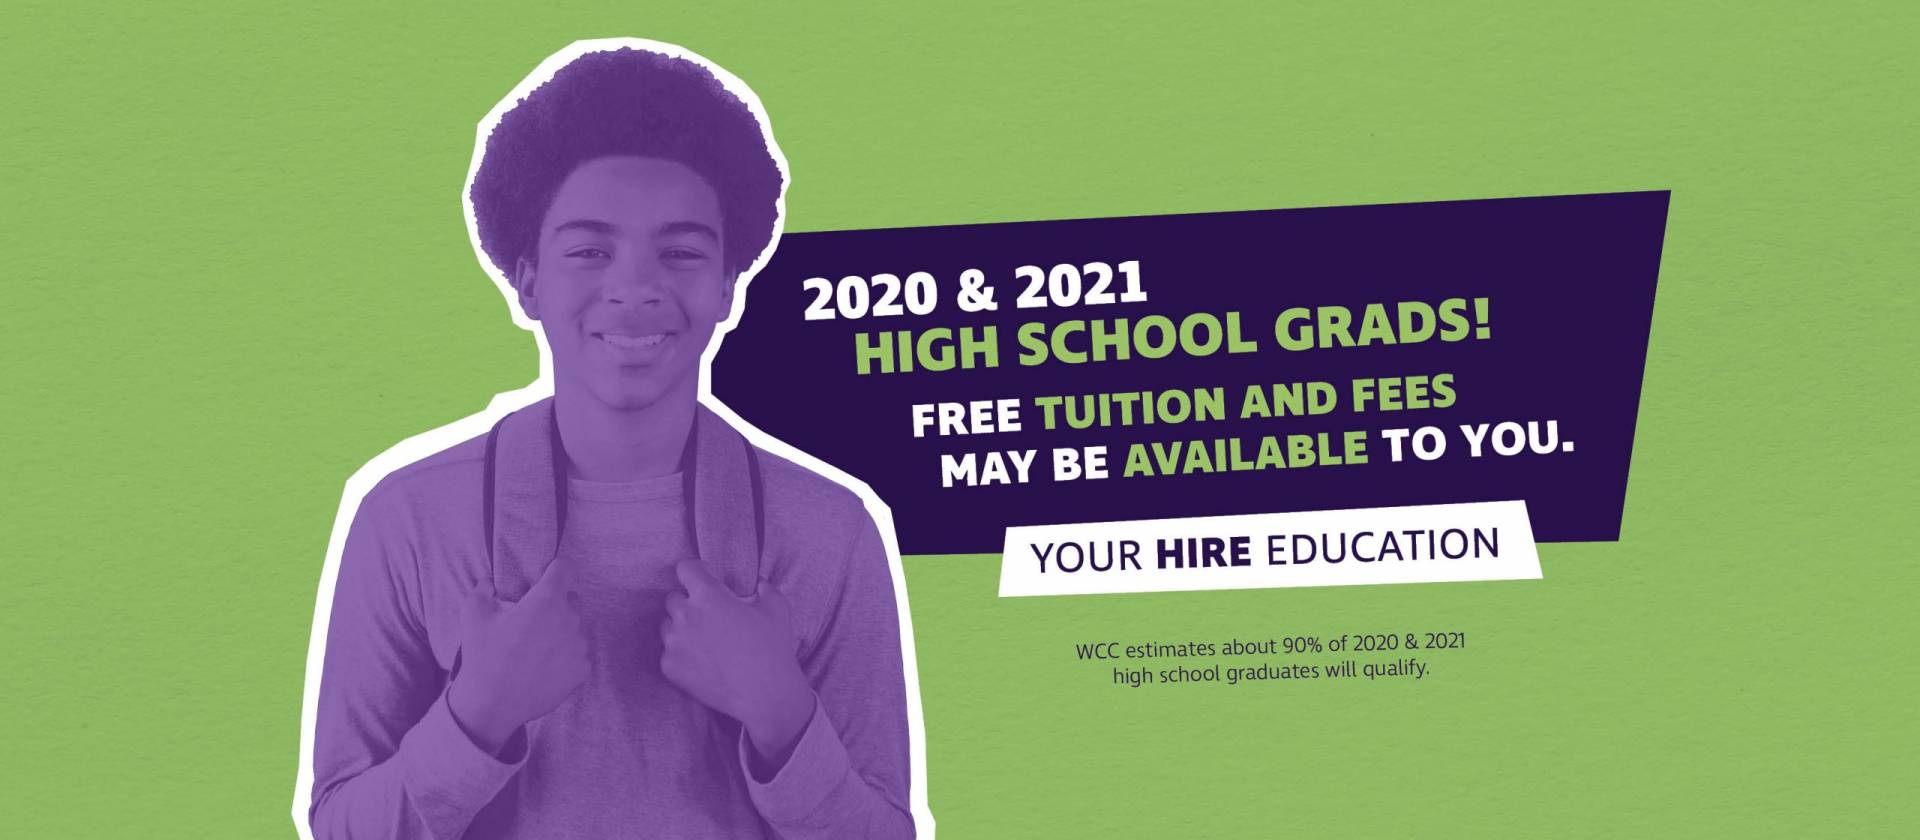 2020 & 2021 High School Grads! Free tuition and fees may be available to you. Your Hire Education, WCC estimates about 90% of 2020 & 2021 high school graduates will qualify.